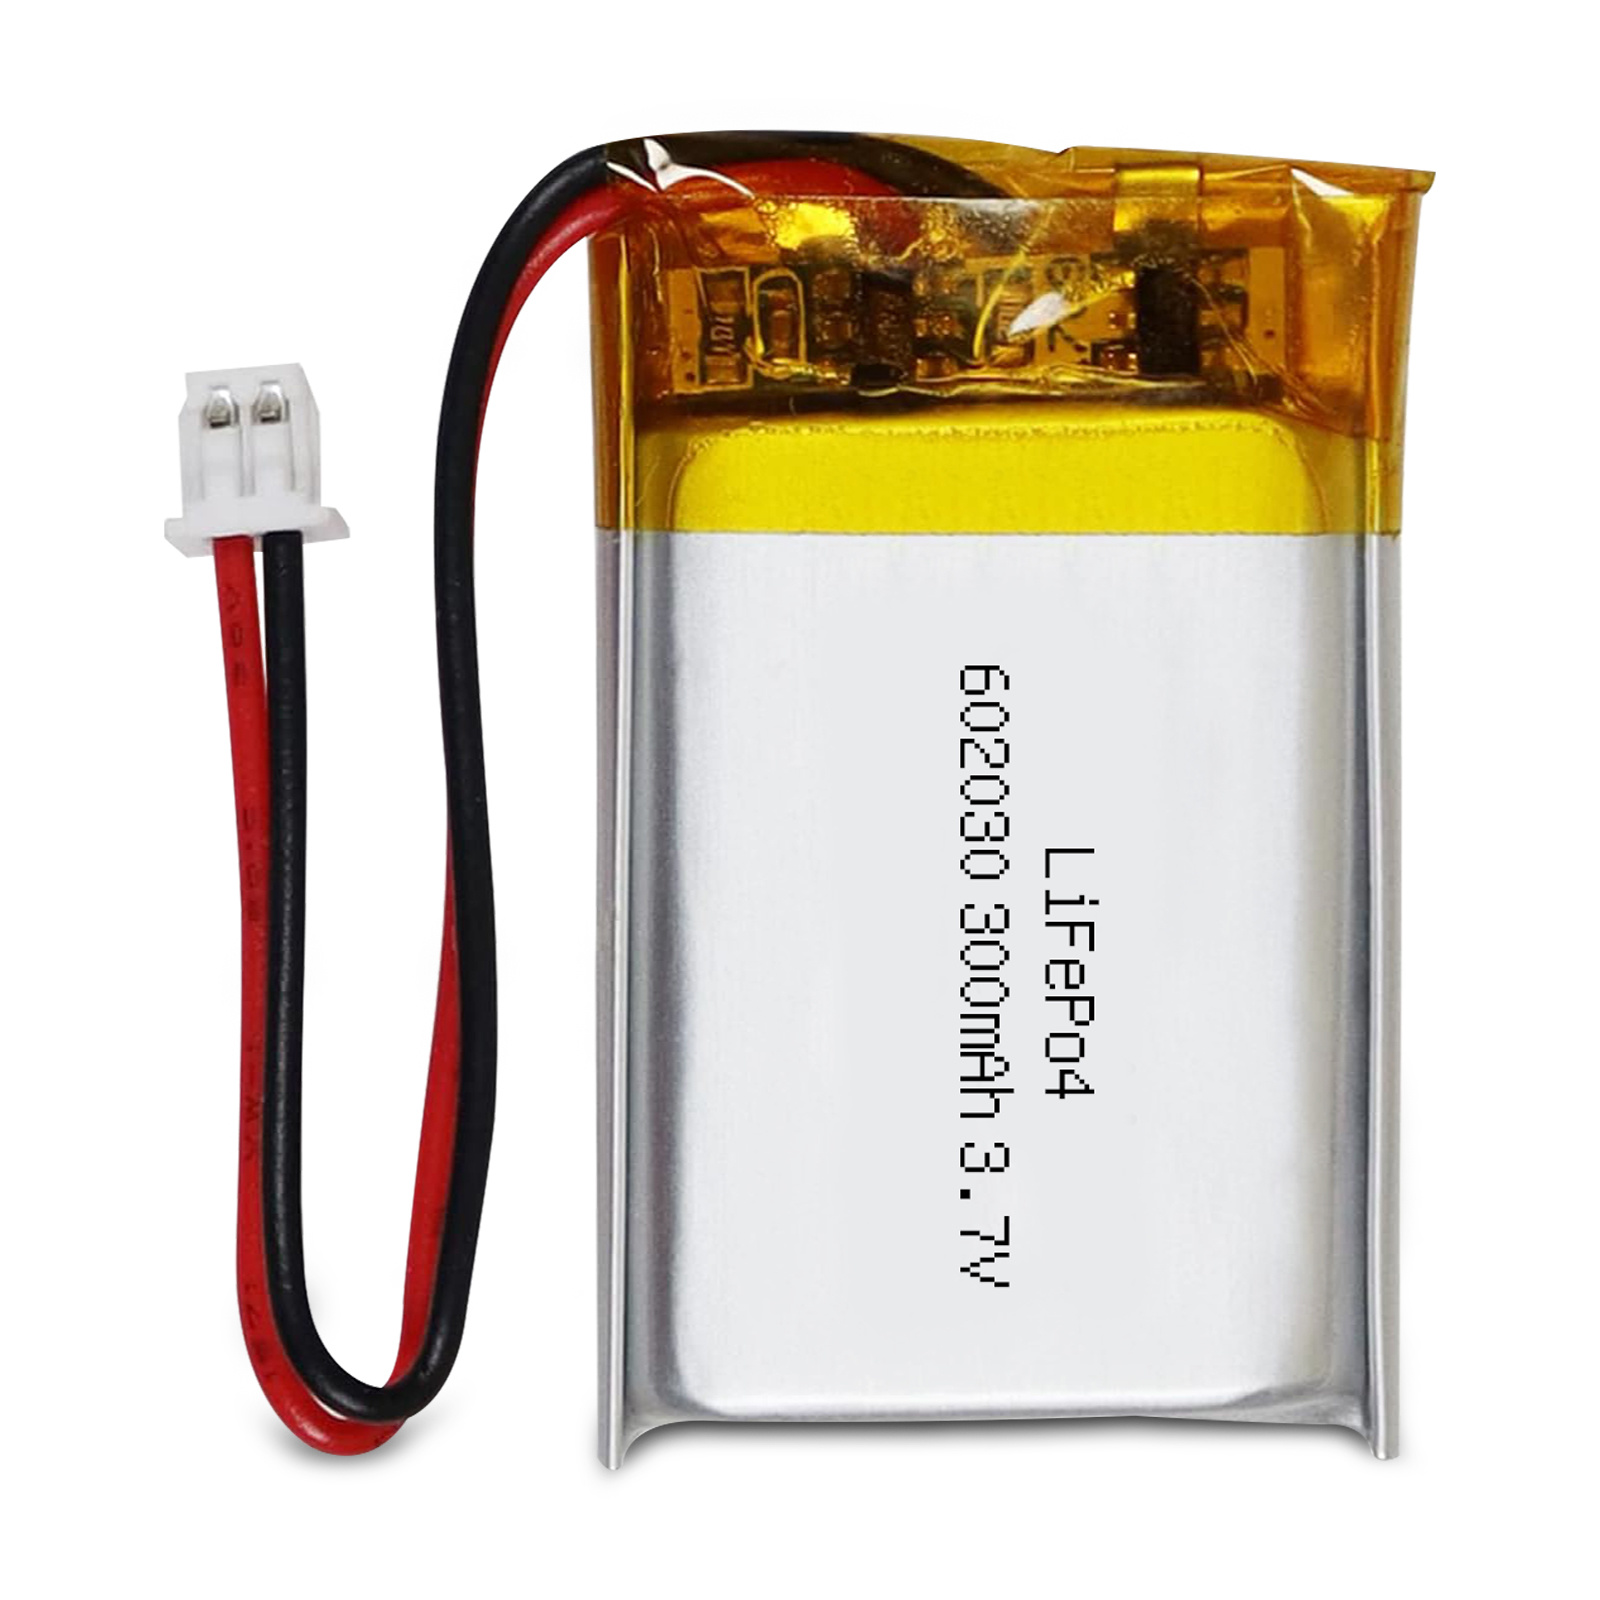 602030 3.7v 300mah lifepo4 battery with PH 1.25 JST Connector, PH2.0/2.54 JST Connector for Replacement digital cameras, tablet